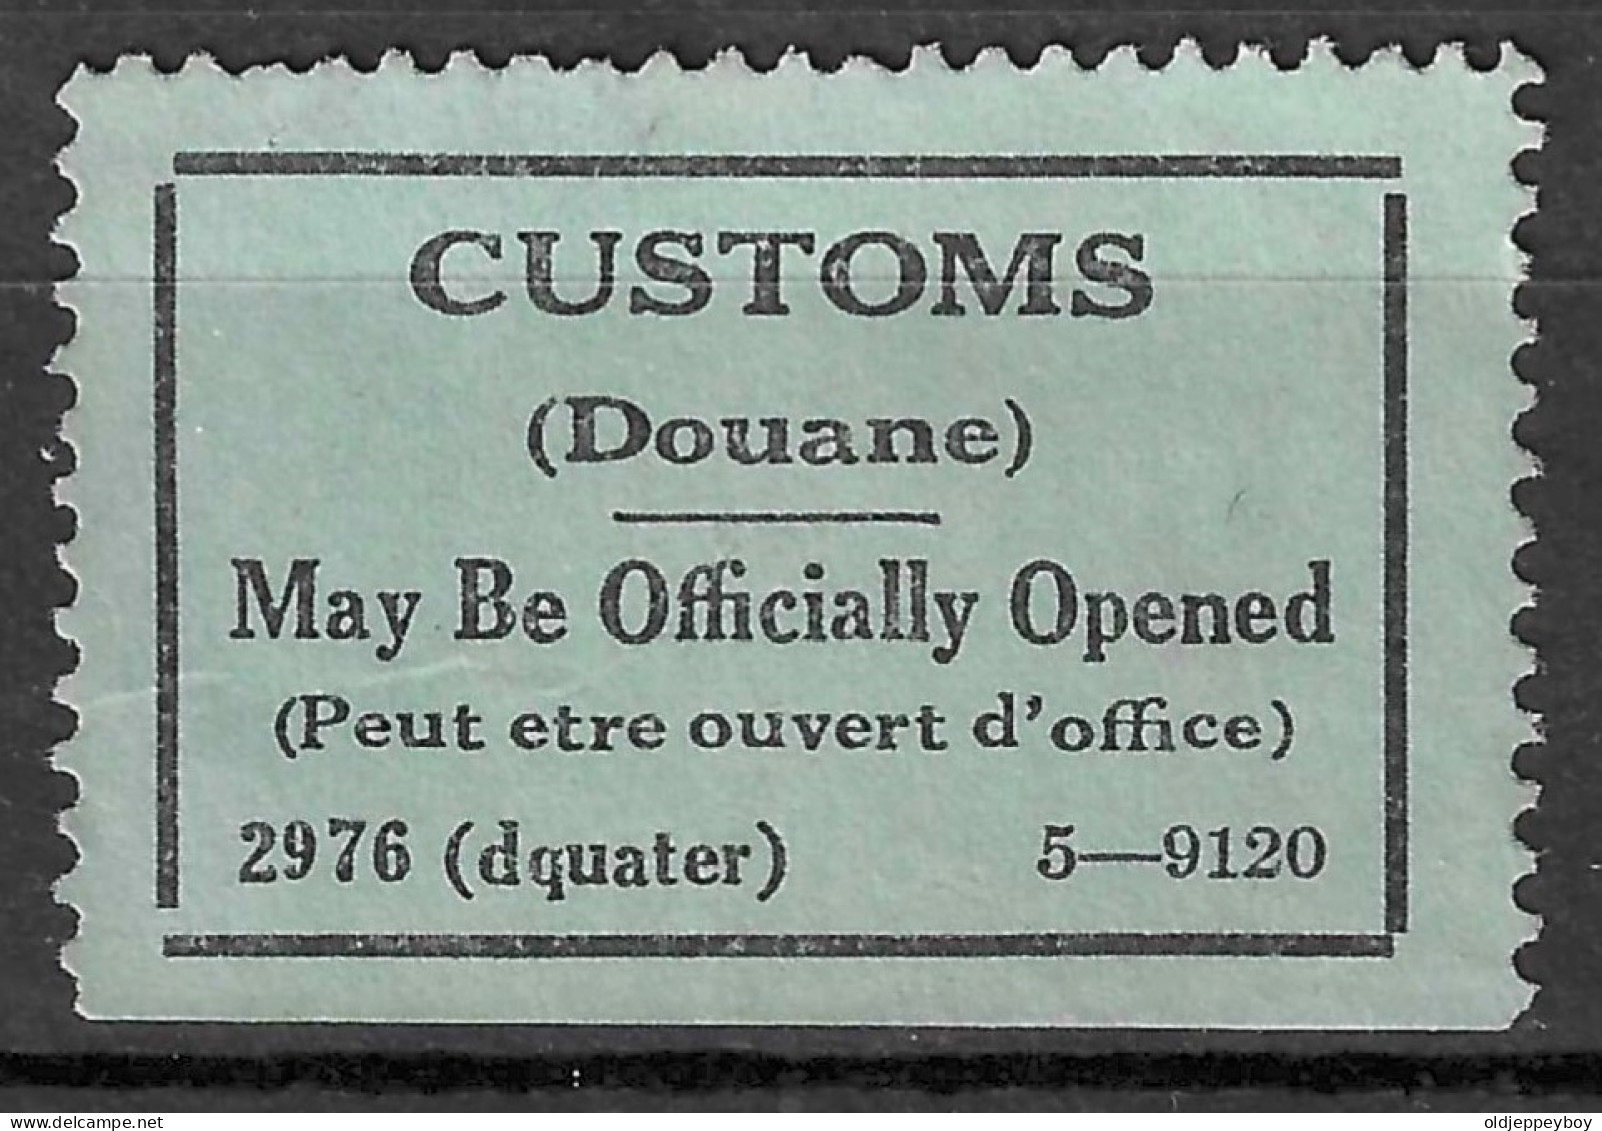 CUSTOMS DOUANE MAY BE OFFICIALLY OPENED DQUATER Peut Etre Ouvert D`office VIGNETTE Reklamemarke Cinderella Erinnophilie  - Erinnofilia